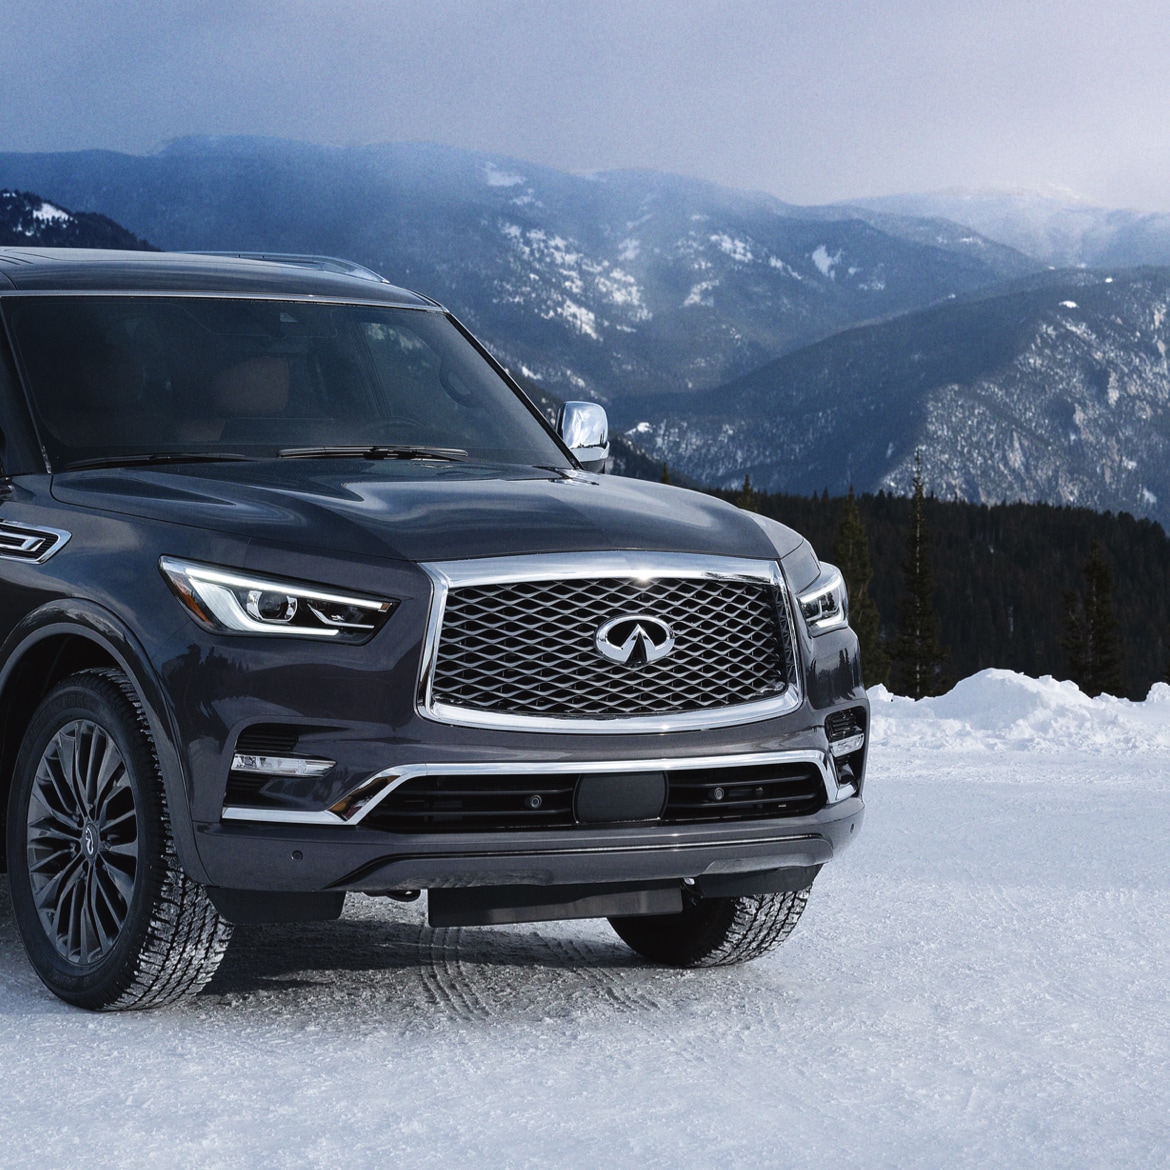 An INFINITI QX80 SUV parked on a snowy mountain